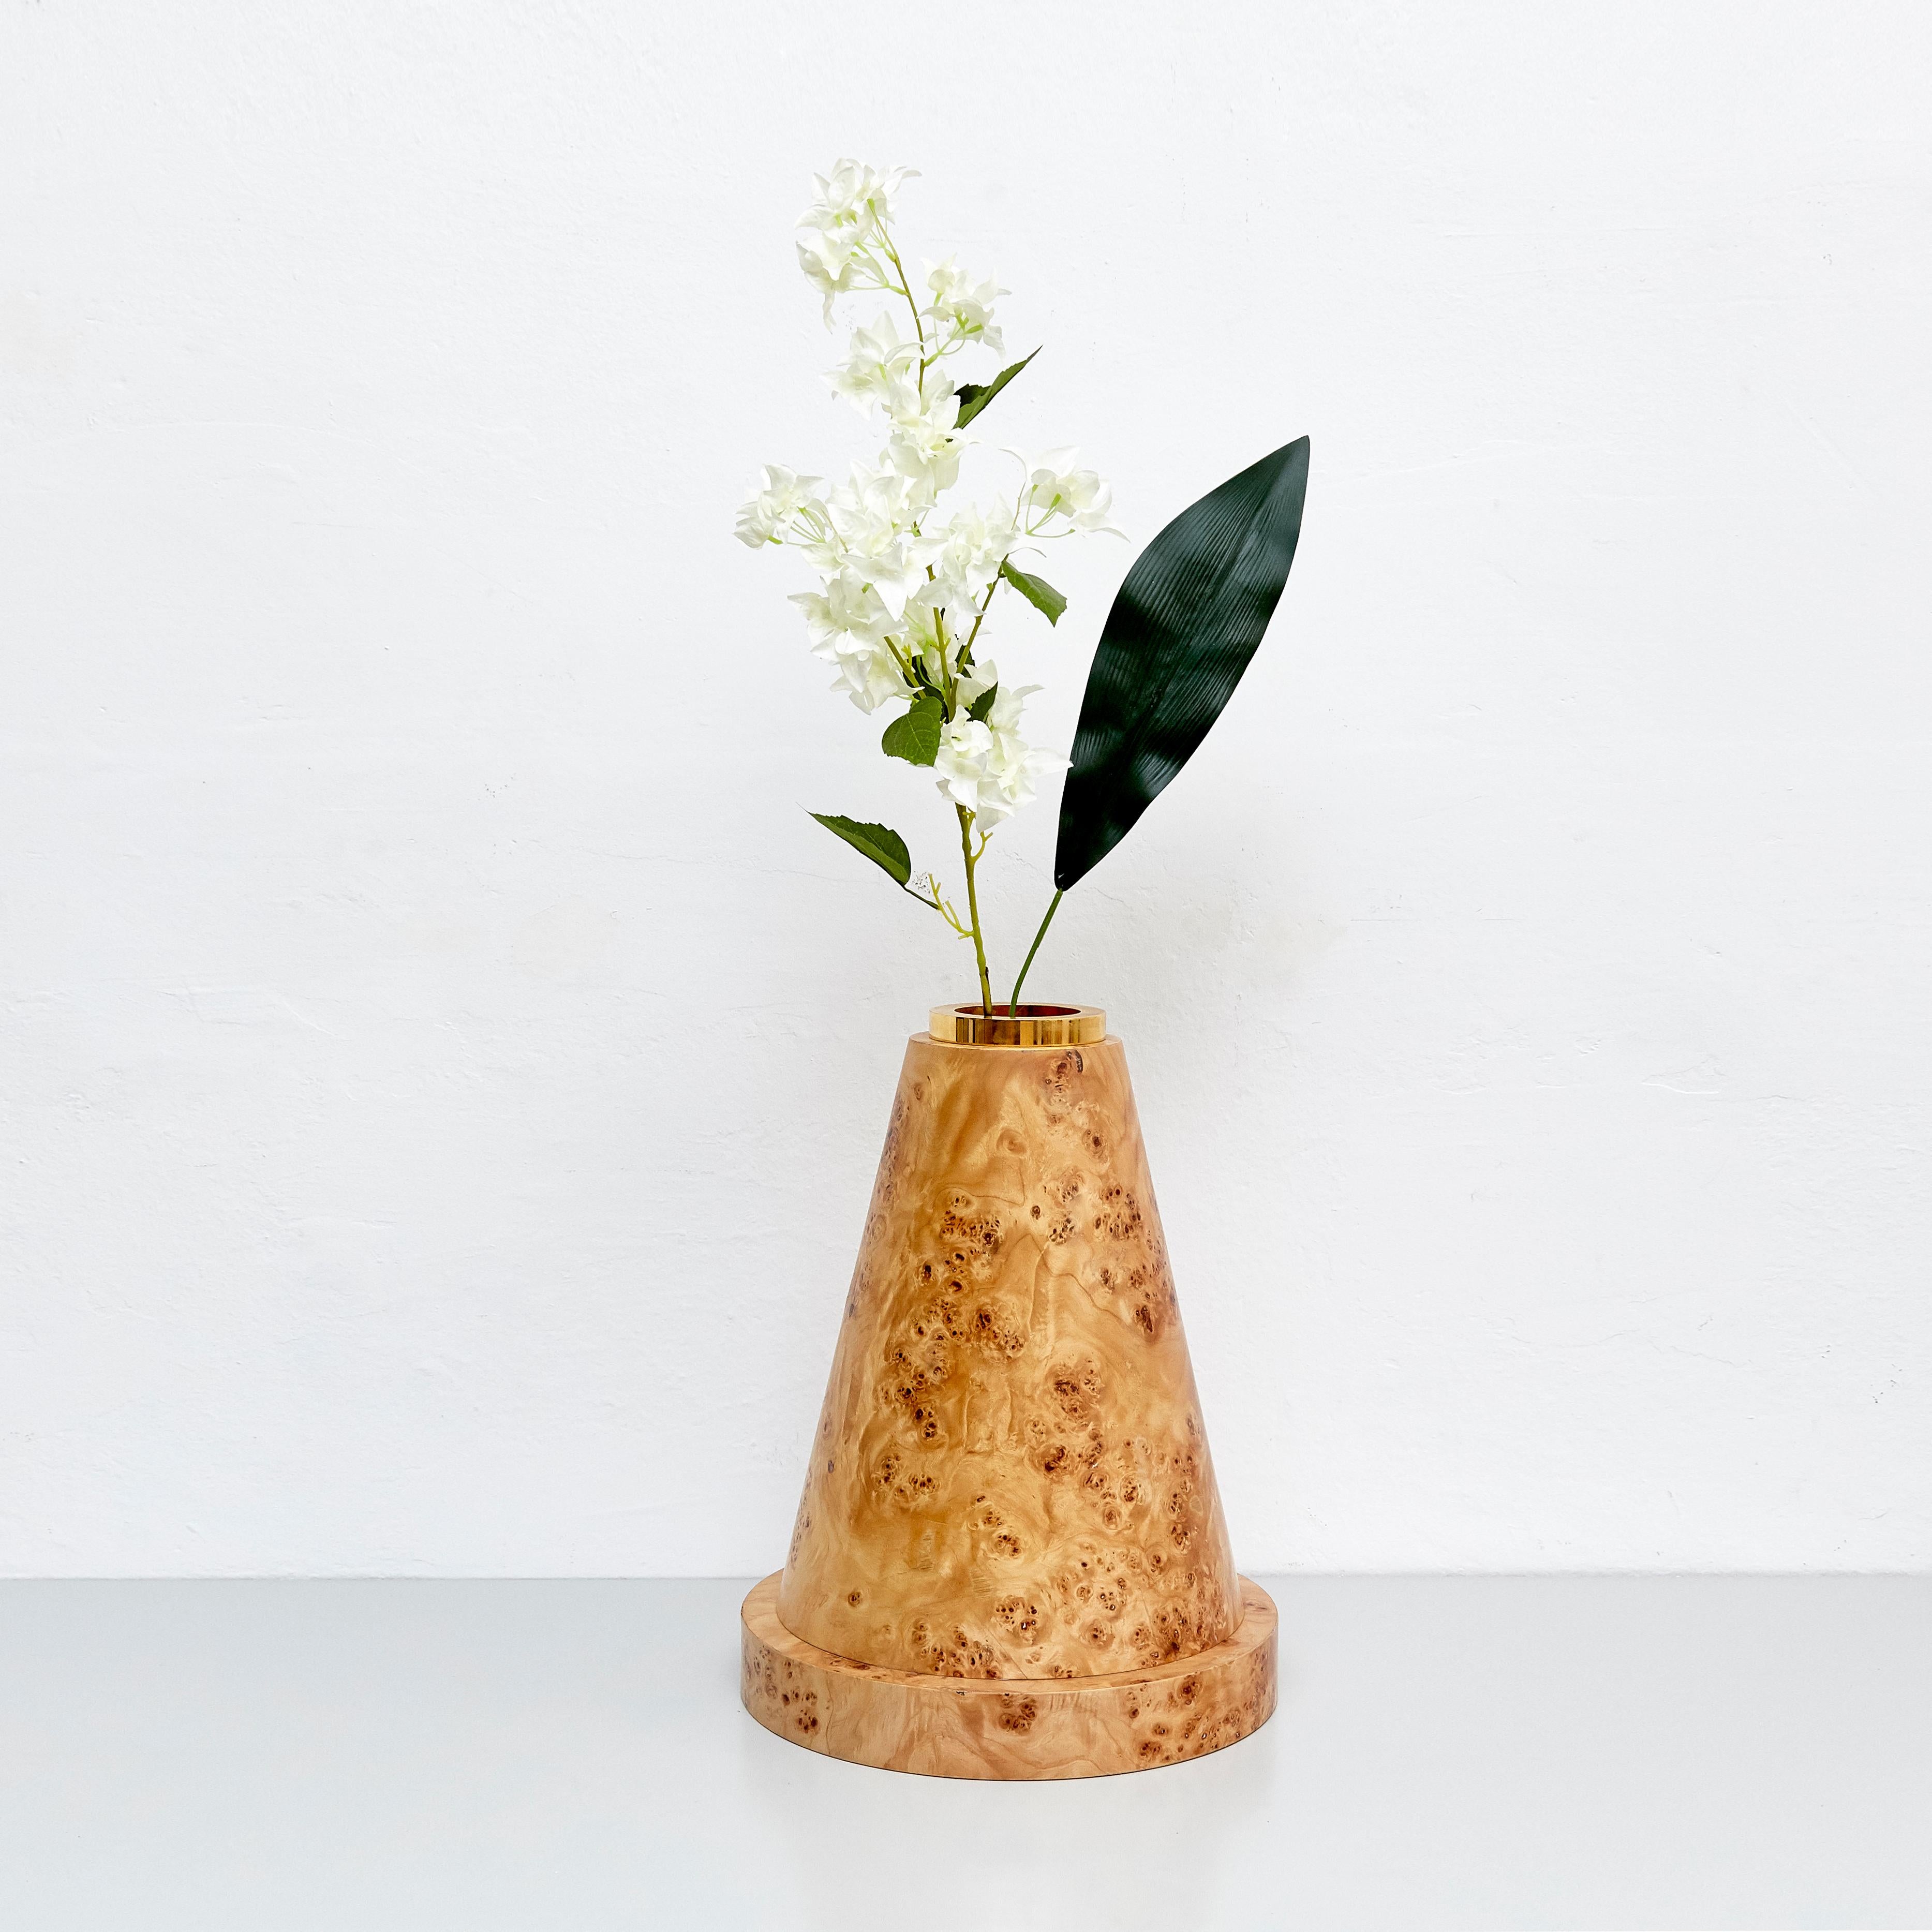 European Twenty-Seven Woods for a Chinese Artificial Flower Vase O by Ettore Sottsass